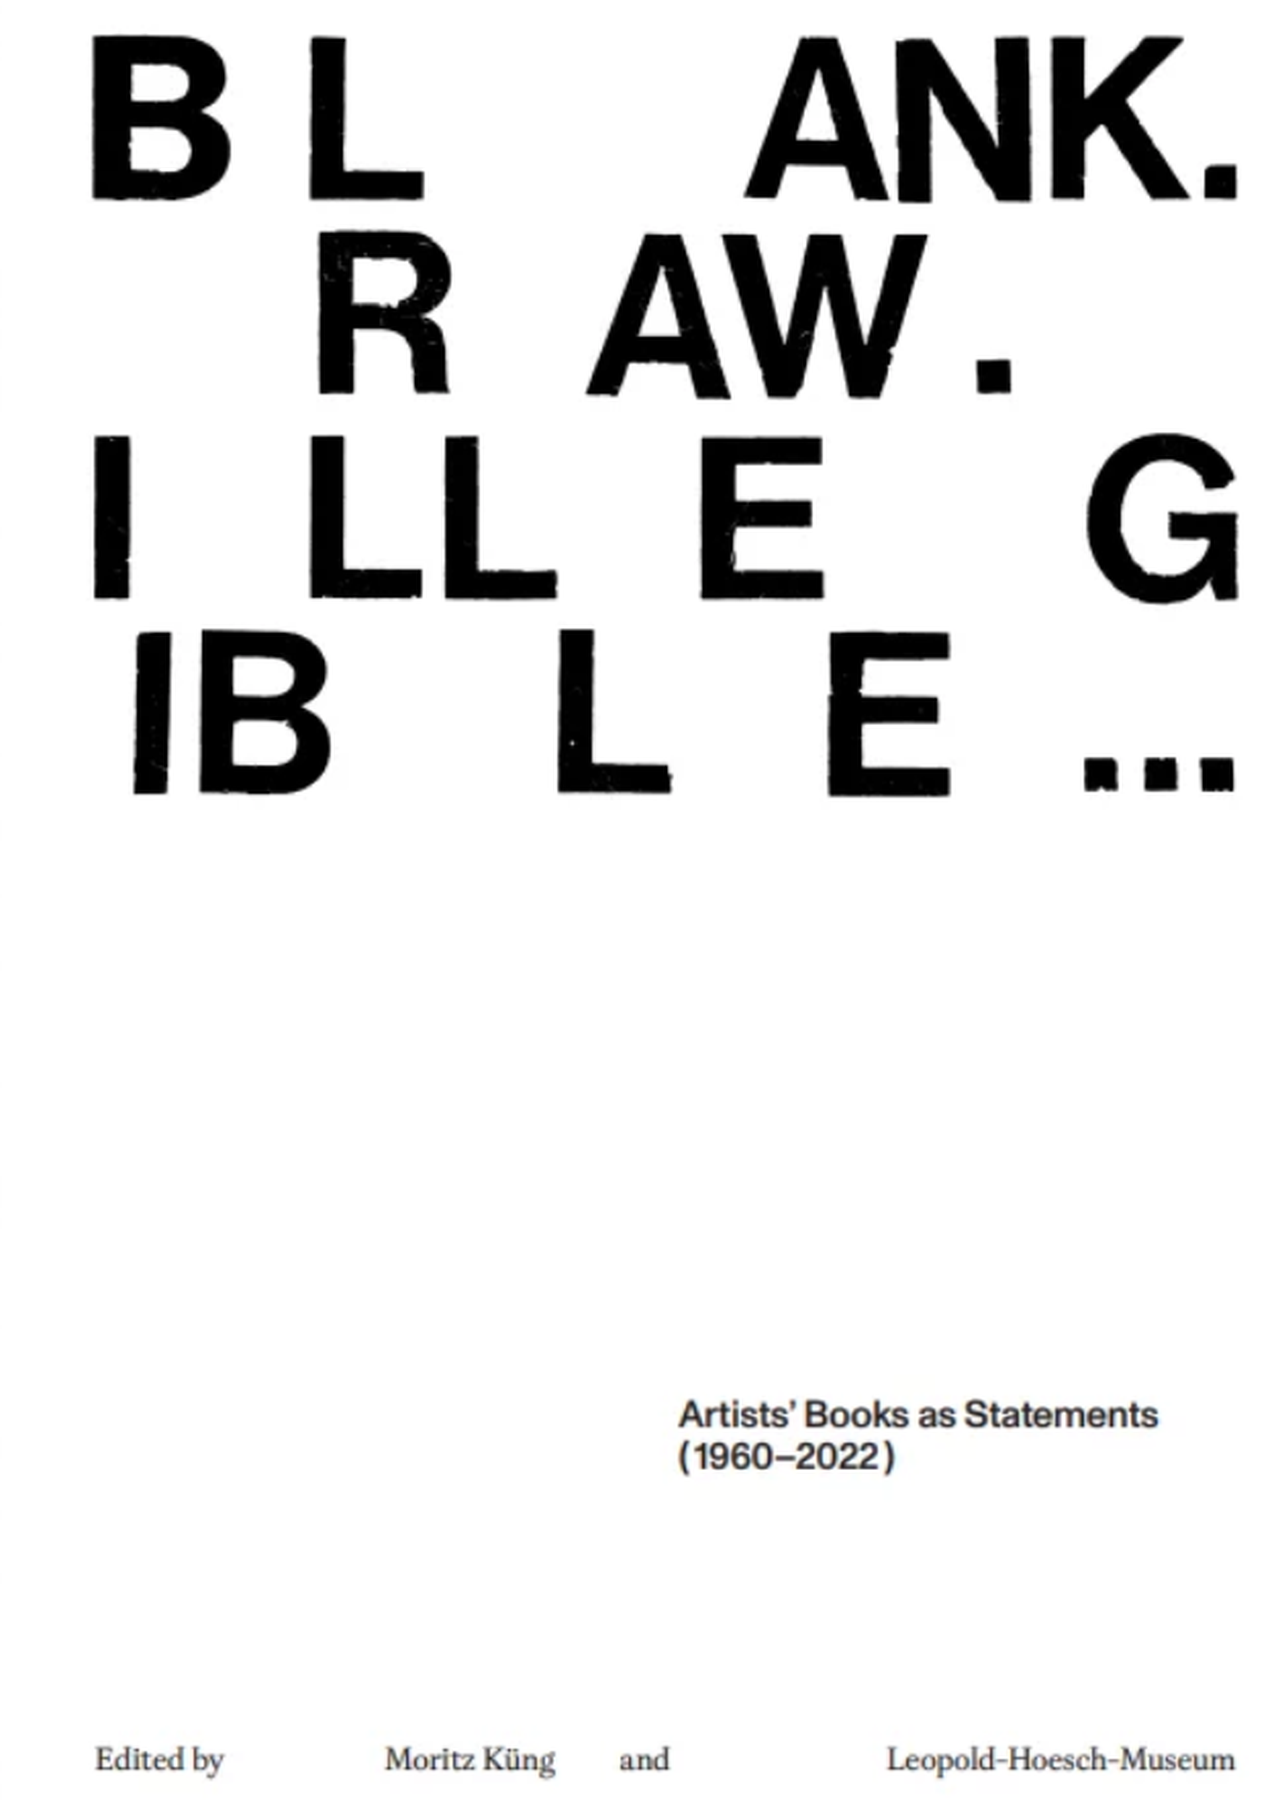 Blank. Raw. Illegible... Artists‘ Books as Statements (1960-2022)